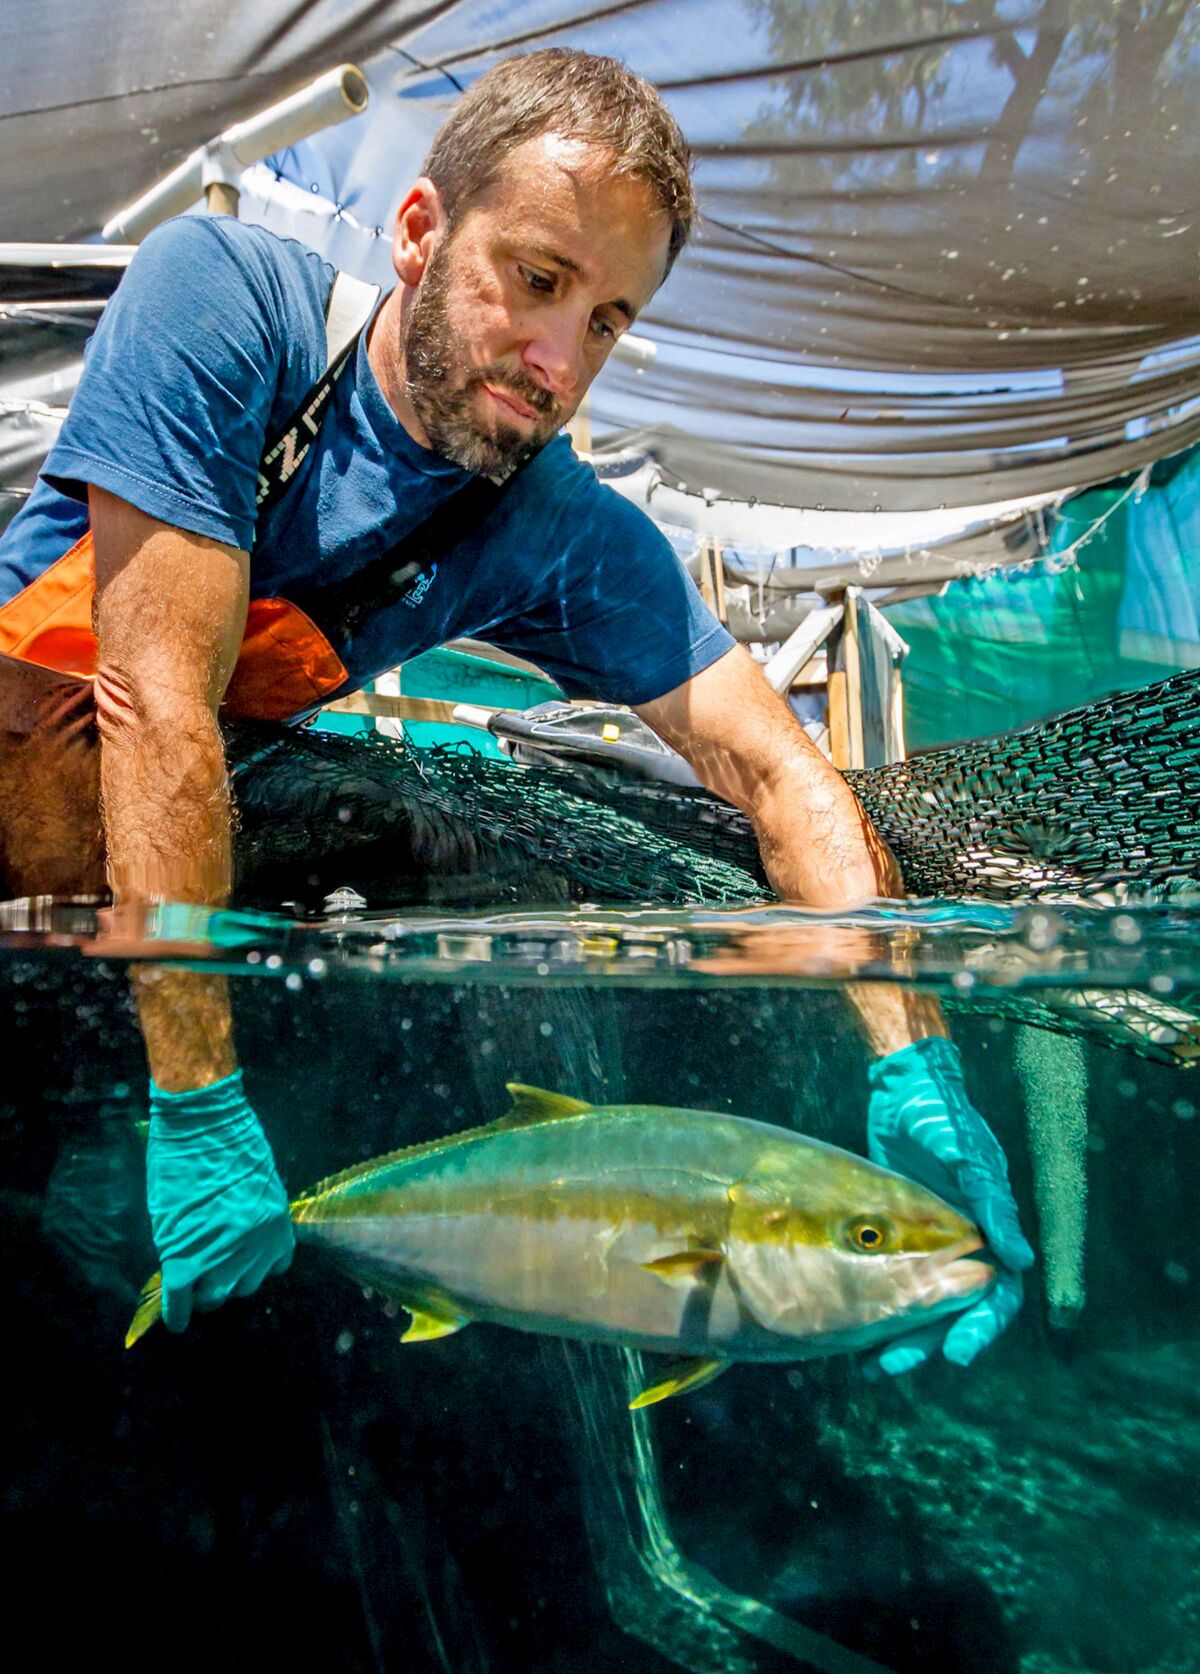 Hubbs-SeaWorld Research Institute researcher Federico Rotman with a young adult California yellowtail.